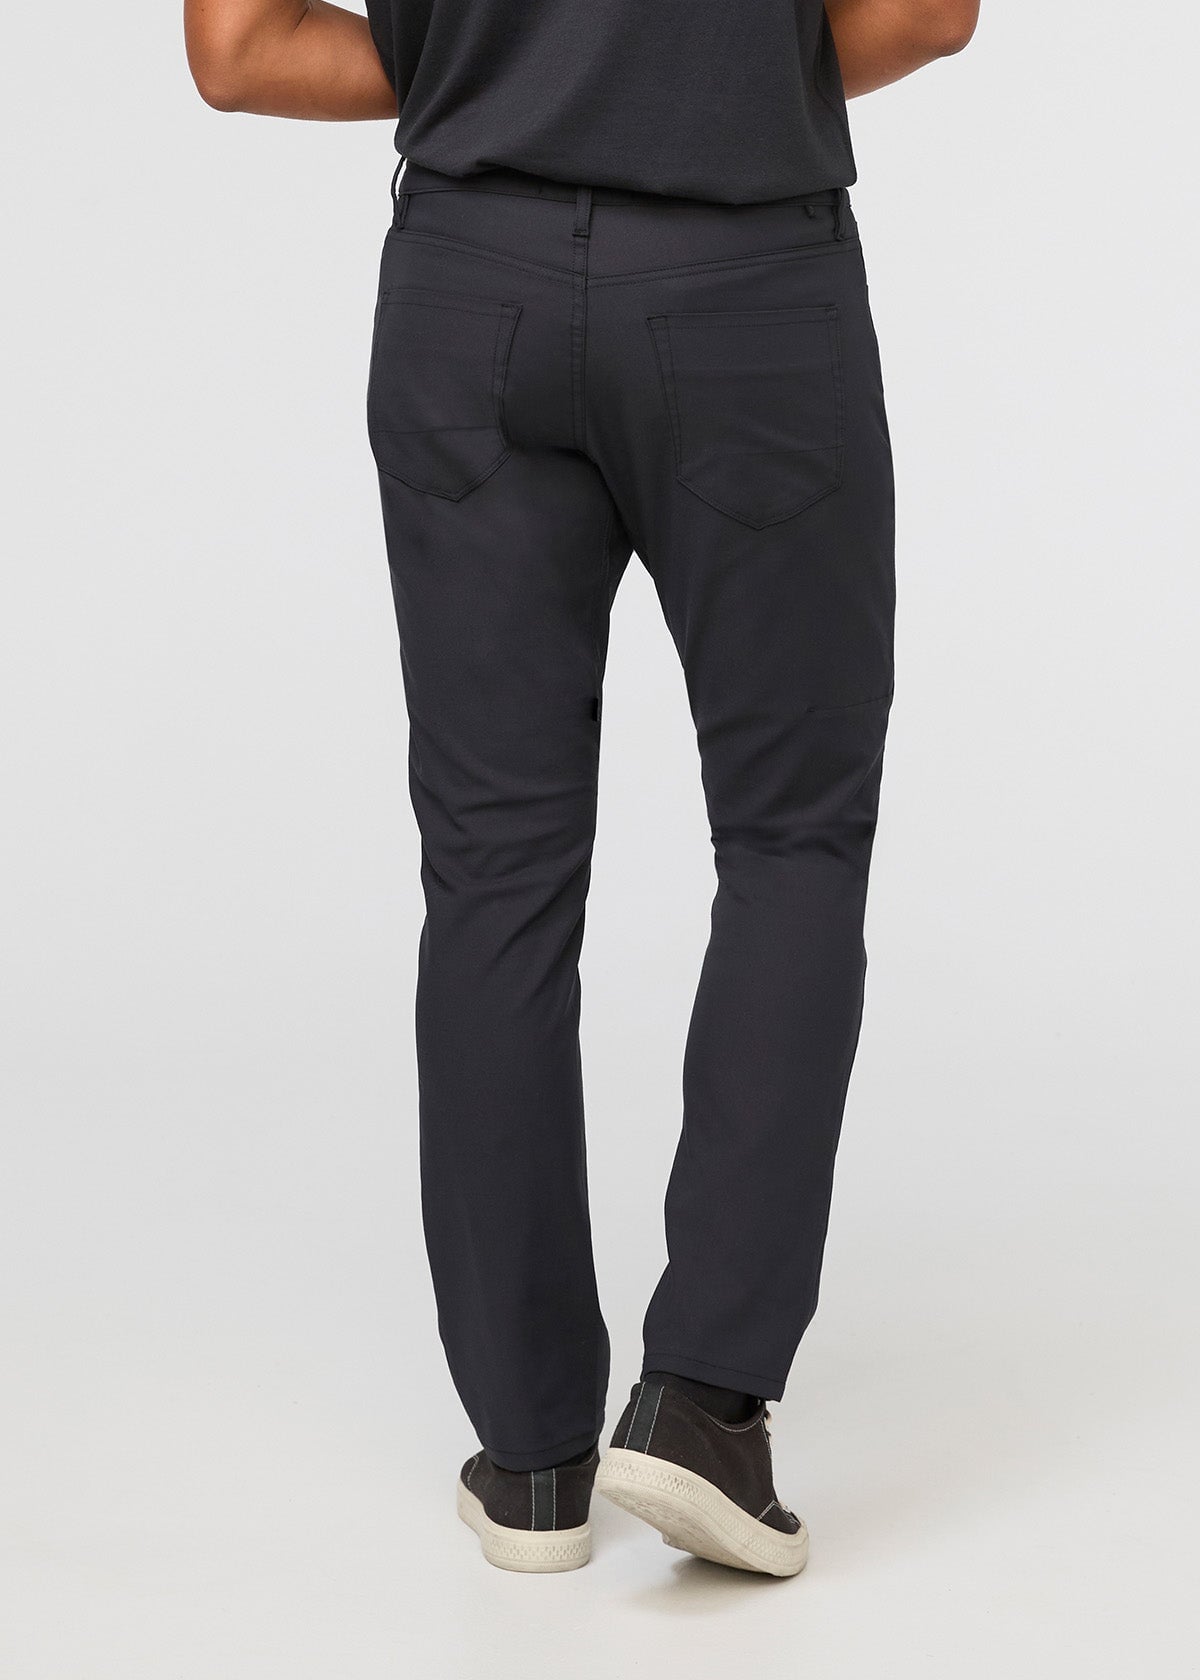 Men's Fitted Stretchy Pants - Black